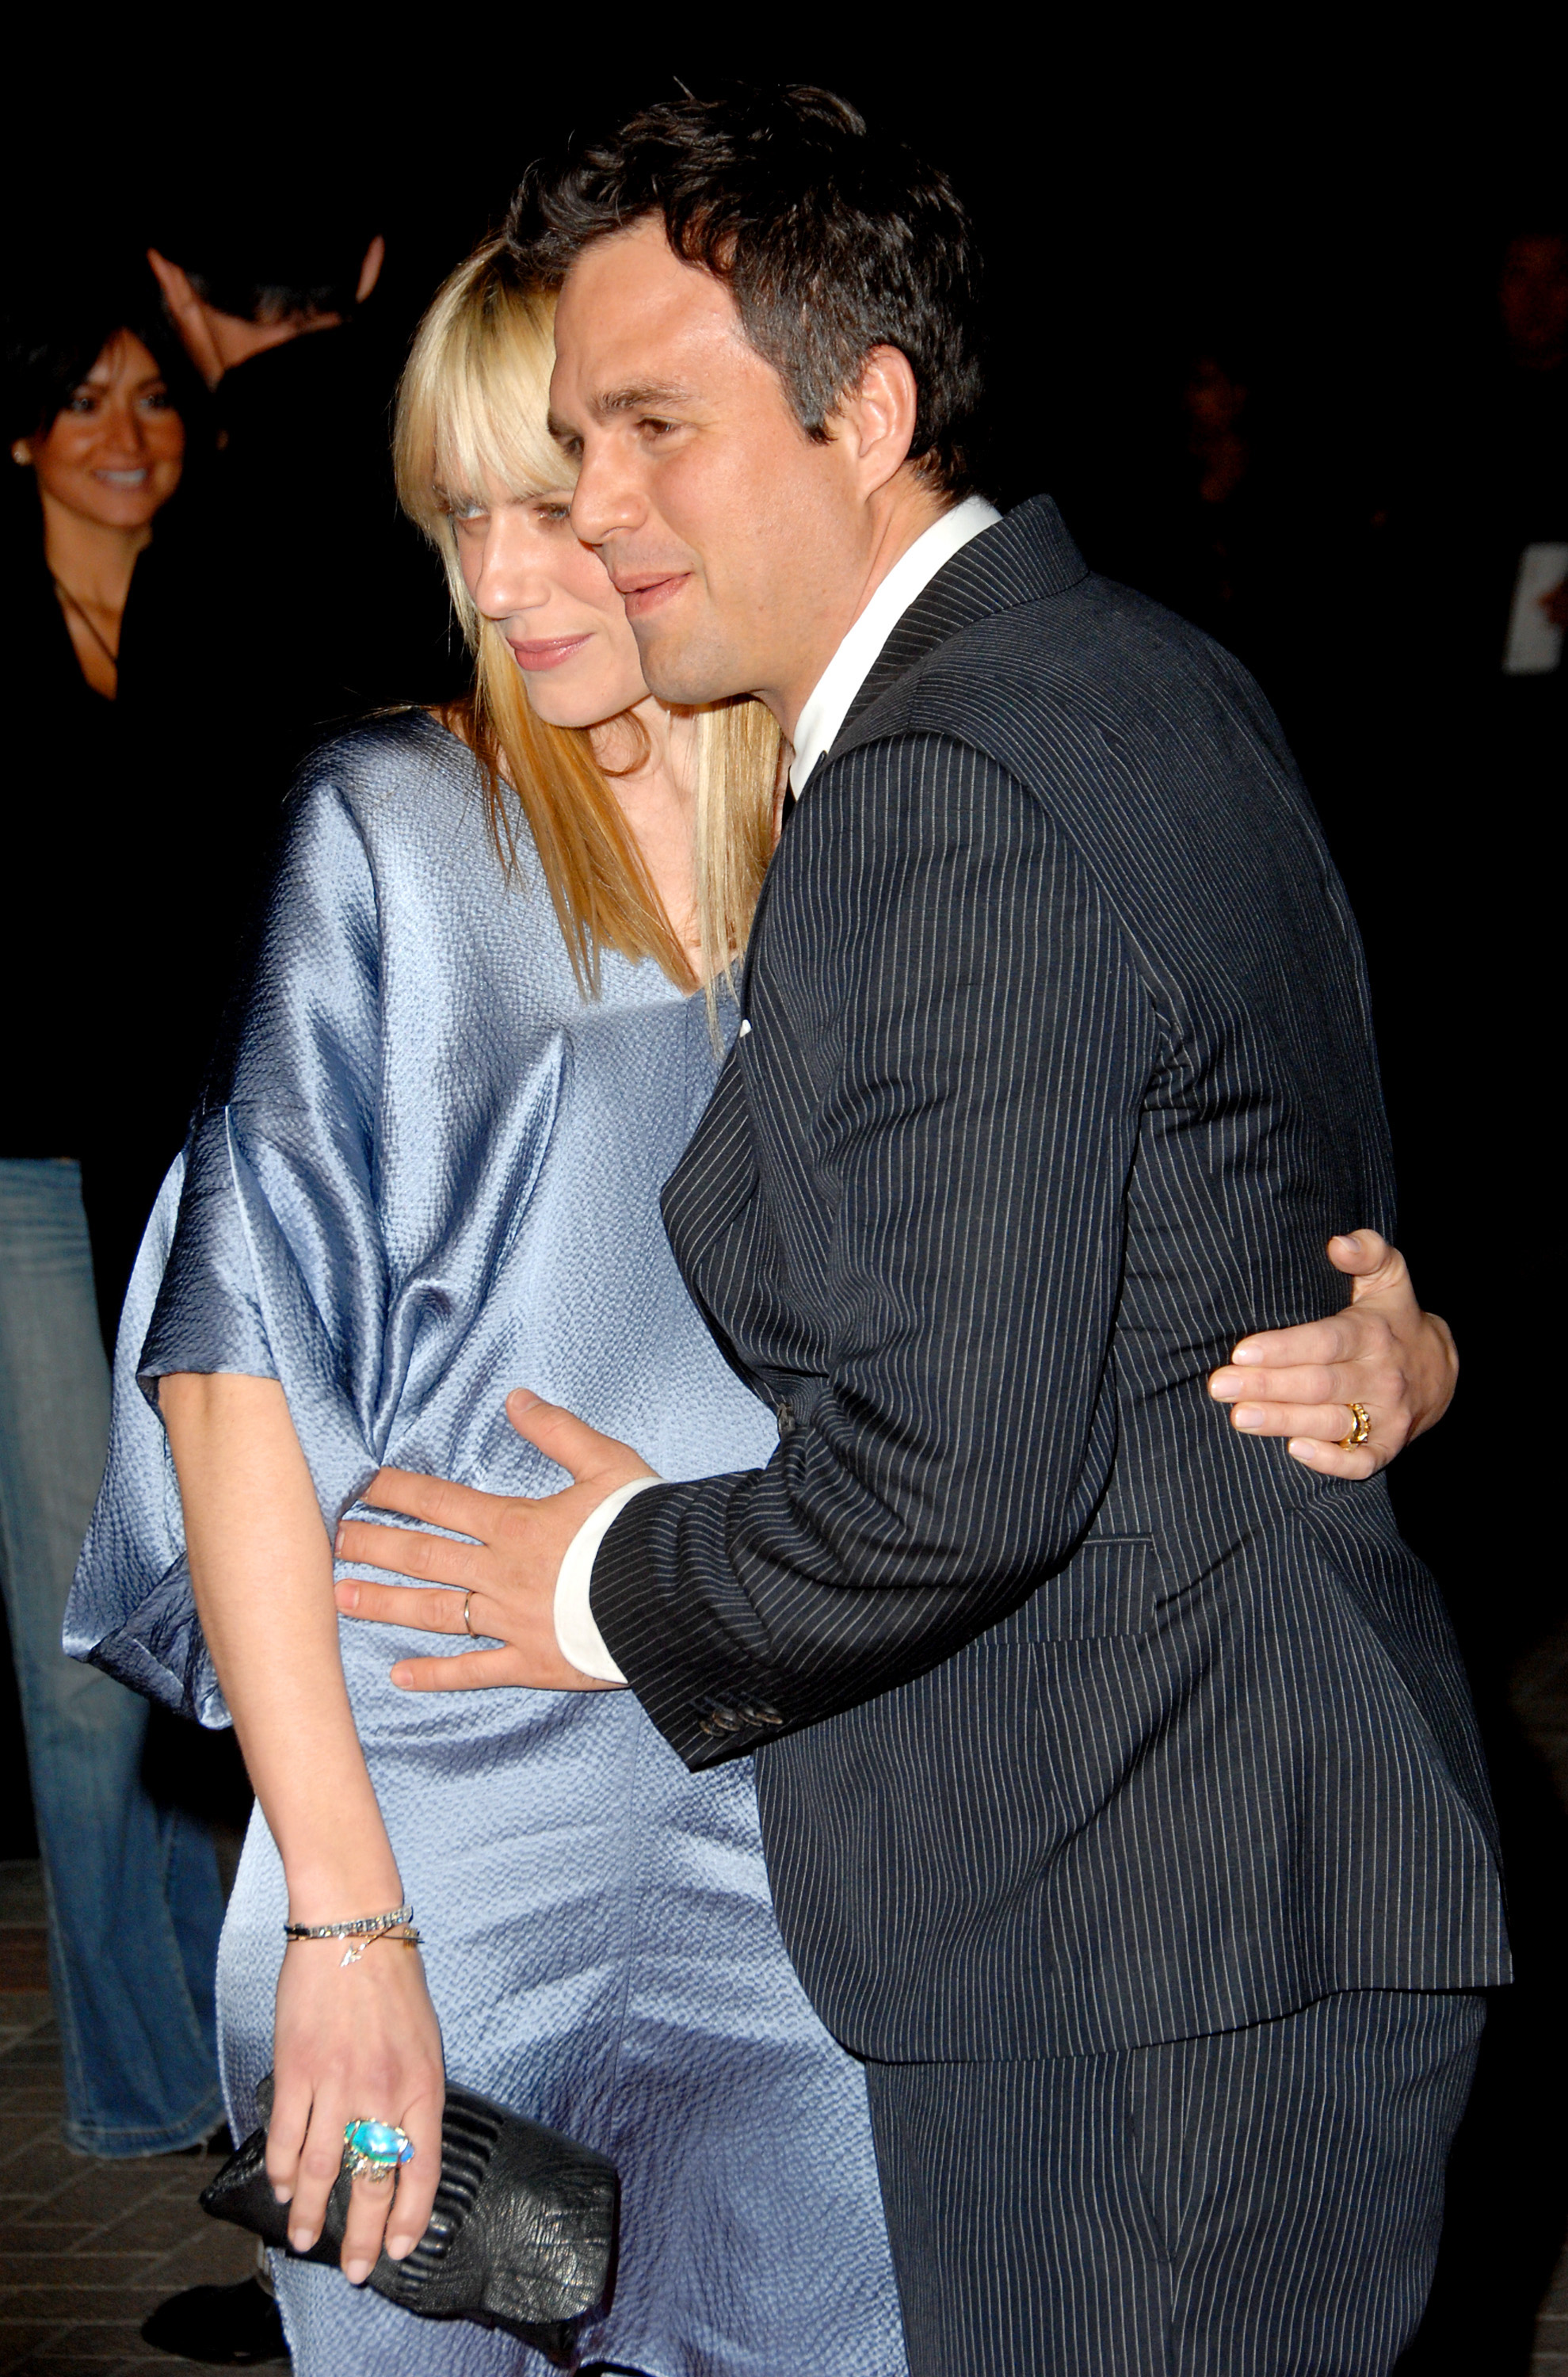 Sunrise and Mark Ruffalo at the premiere of "Zodiac" in Hollywood, California in 2007 | Source: Getty Images